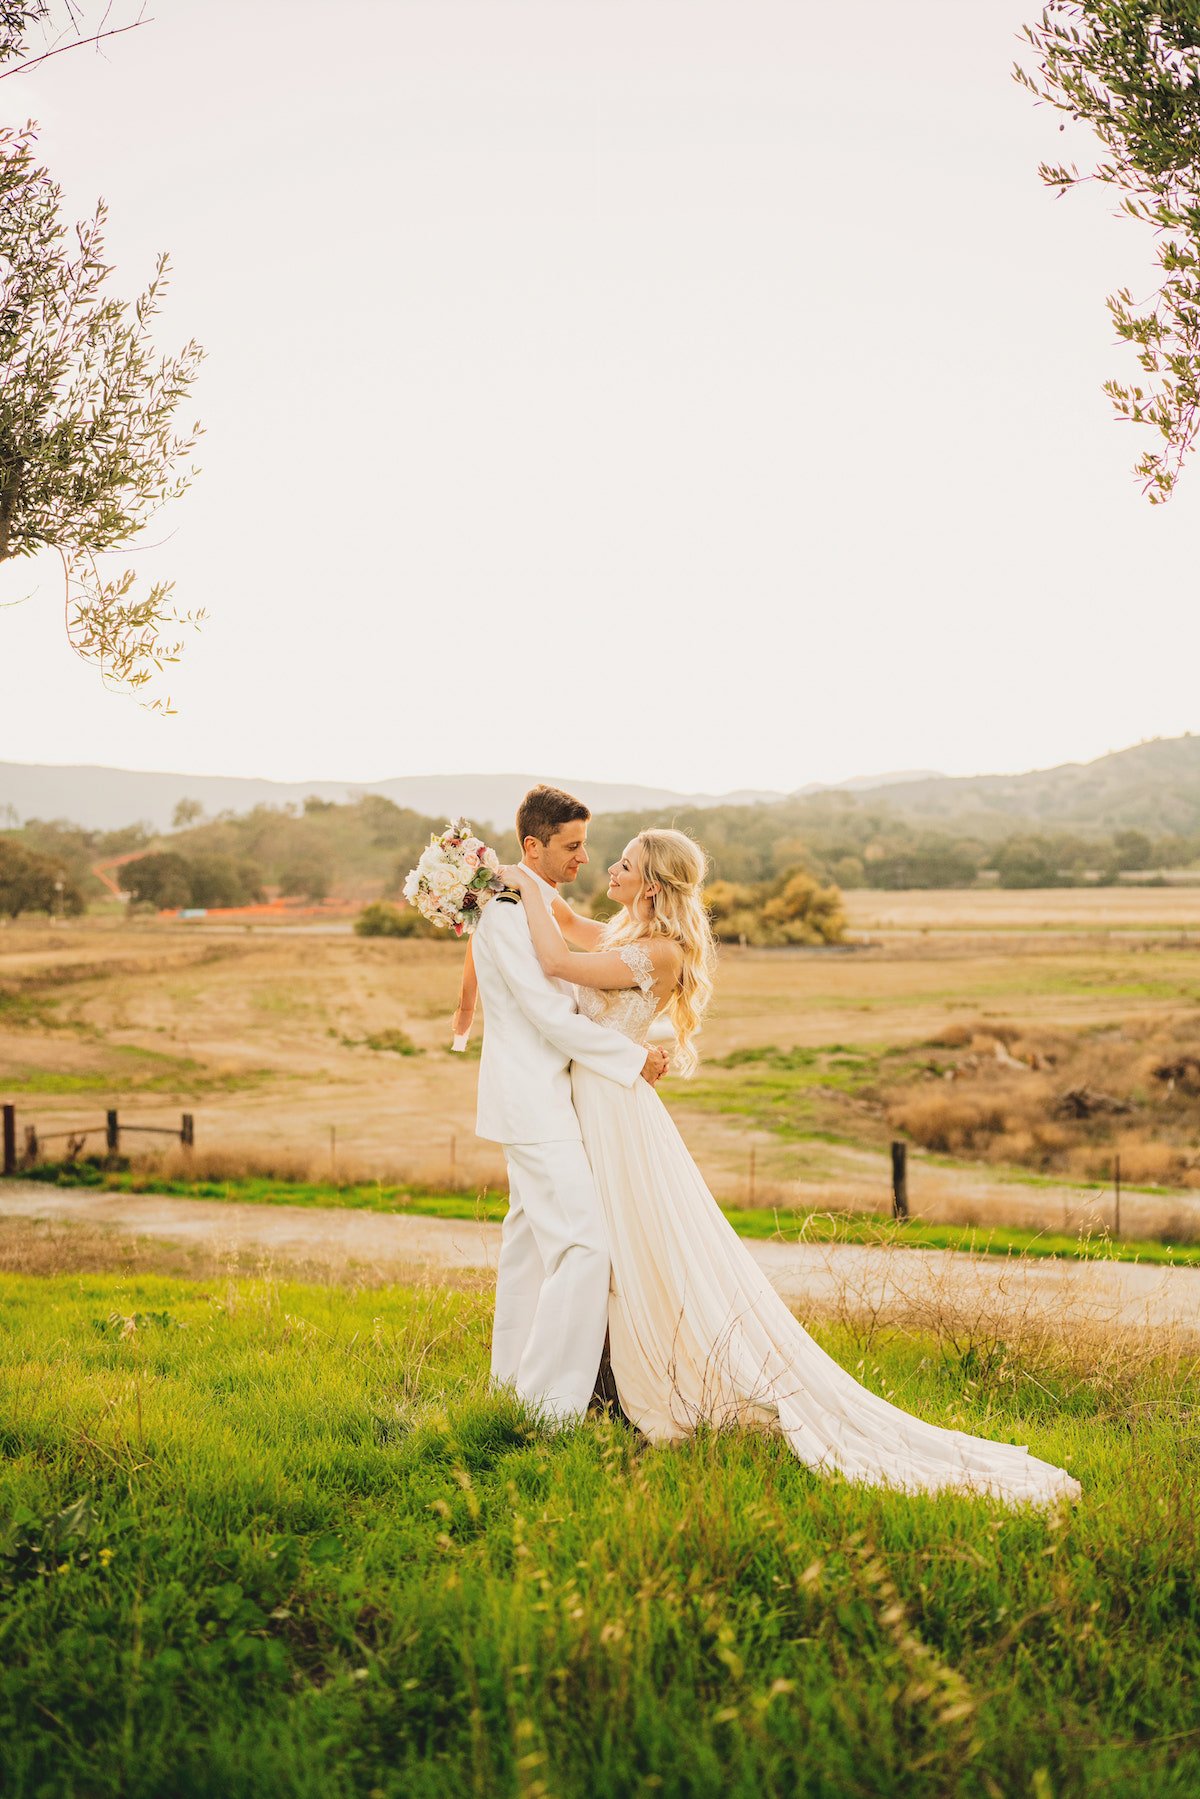 This Rustic Ranch Gets Pretty in Pink for this $50,000 Central California Barn Wedding